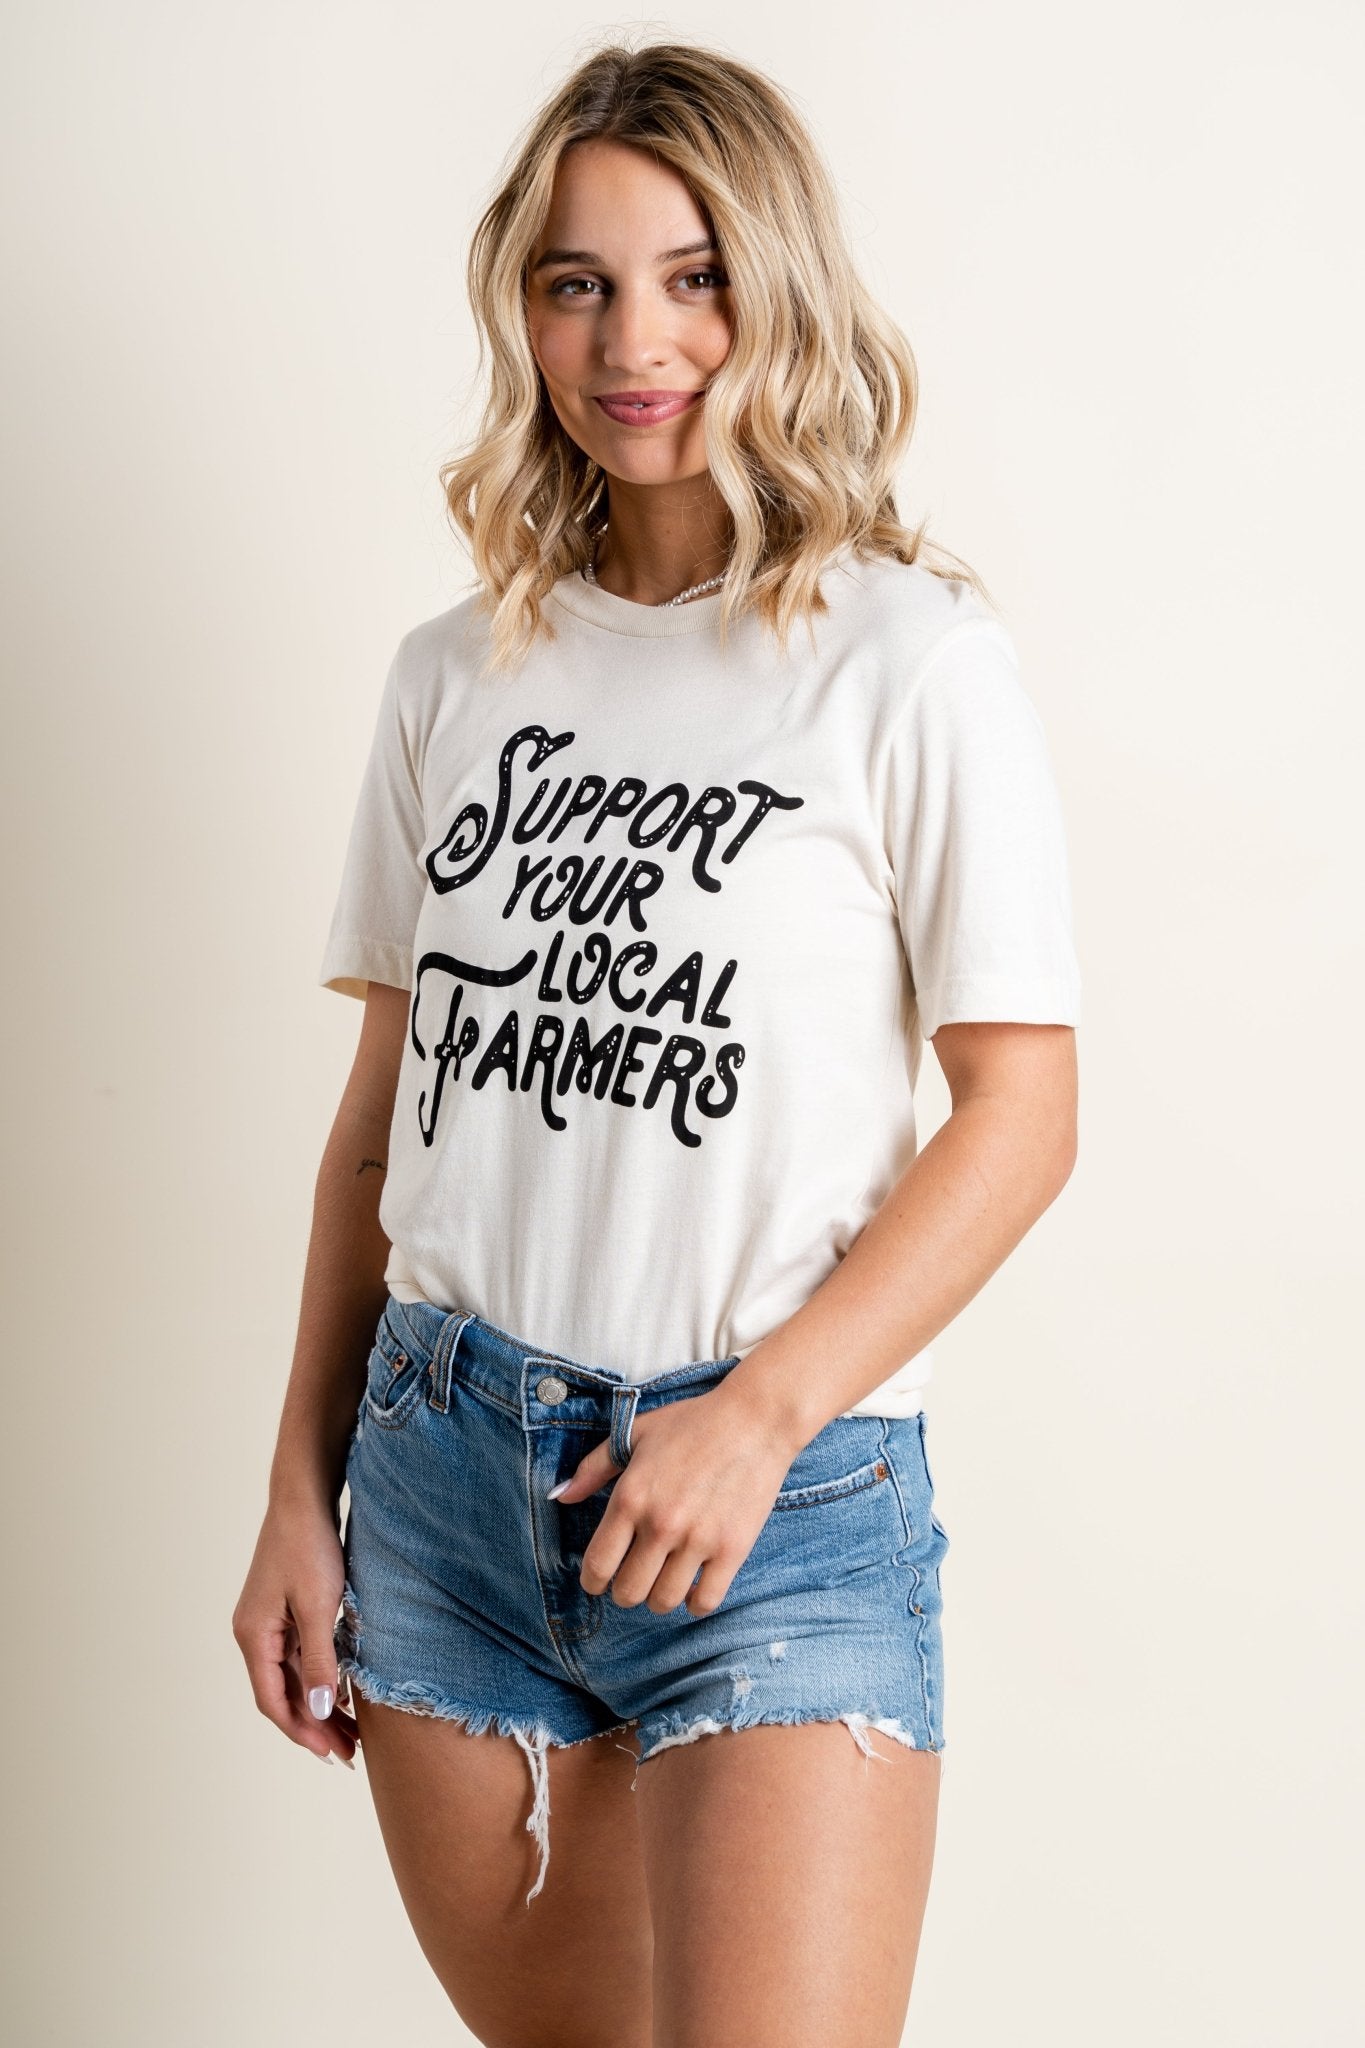 Support local farmers t-shirt ivory/natural - Affordable T-shirts - Boutique Graphic T-Shirts at Lush Fashion Lounge Boutique in Oklahoma City